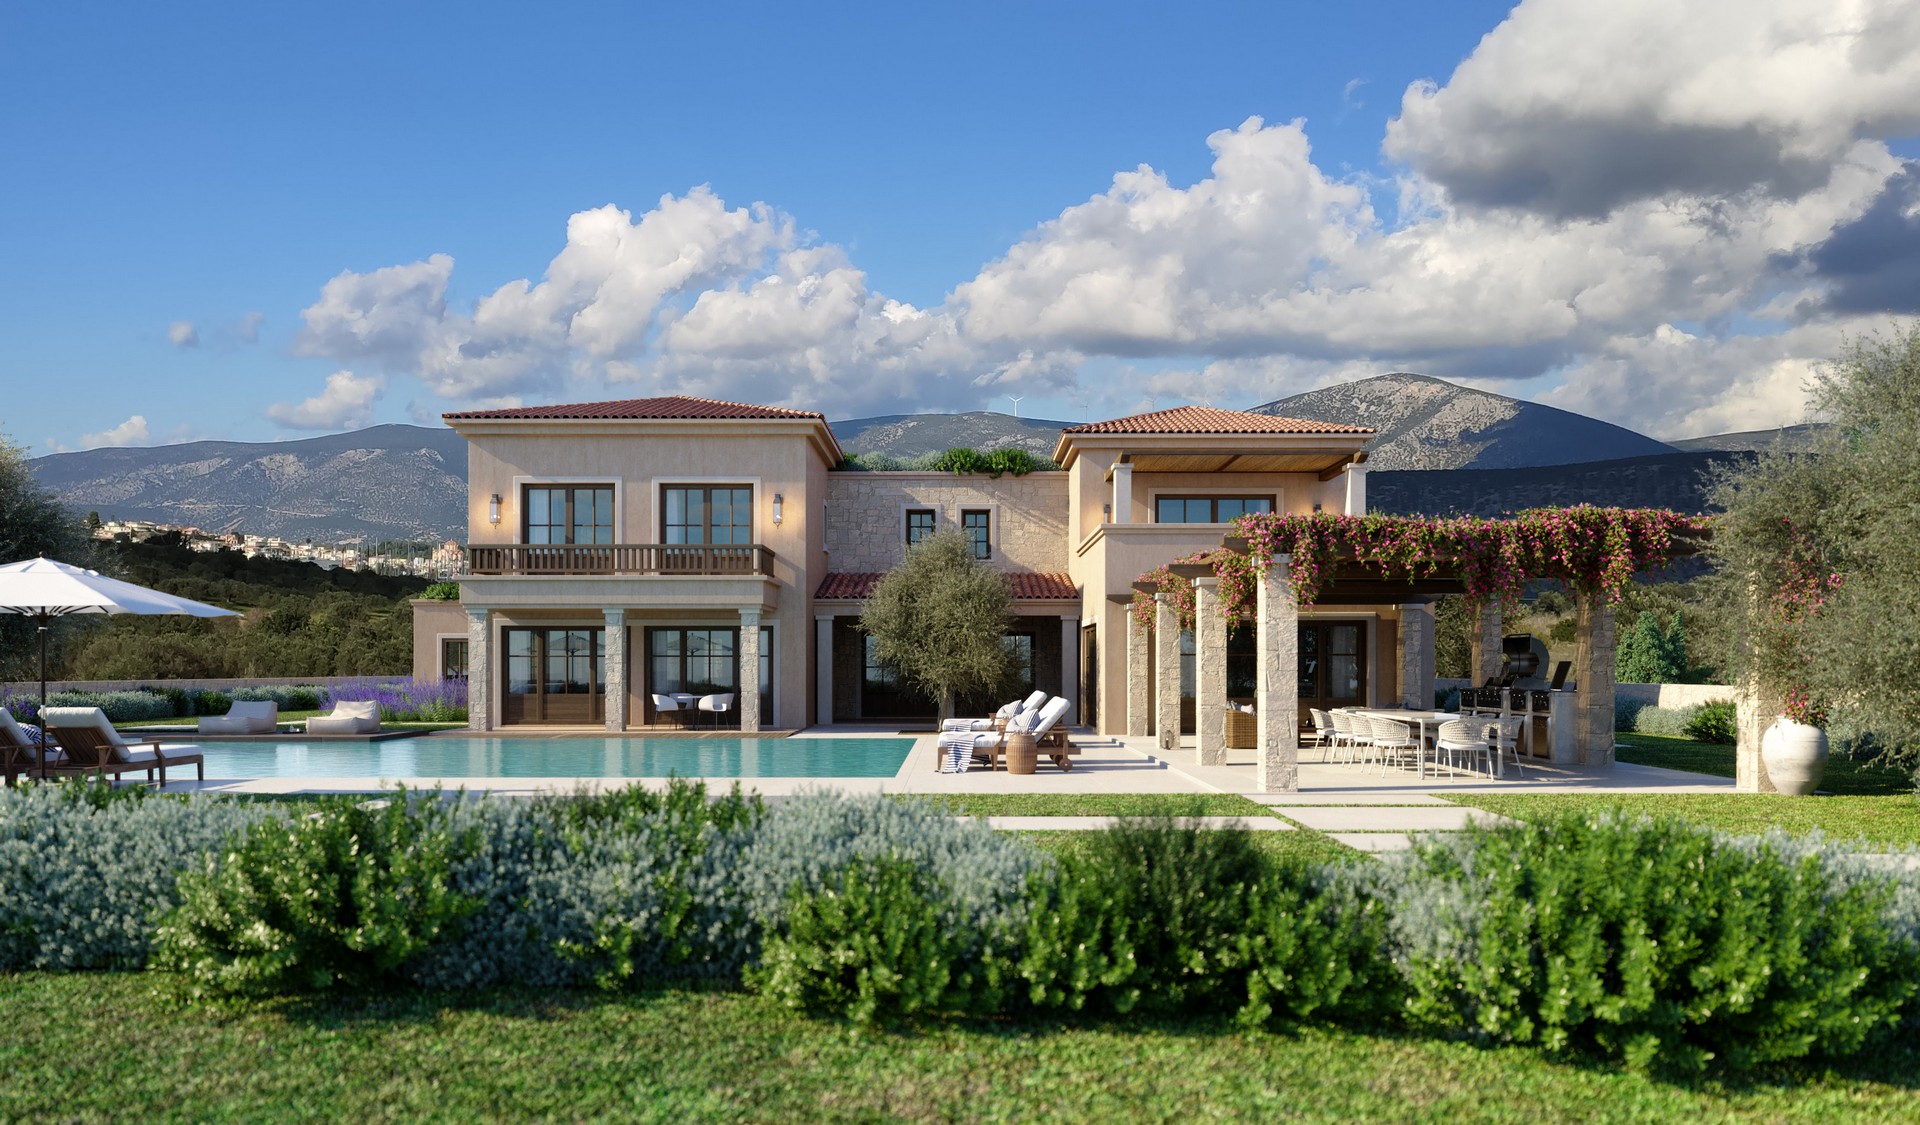 Residential Villa In The Peloponesse